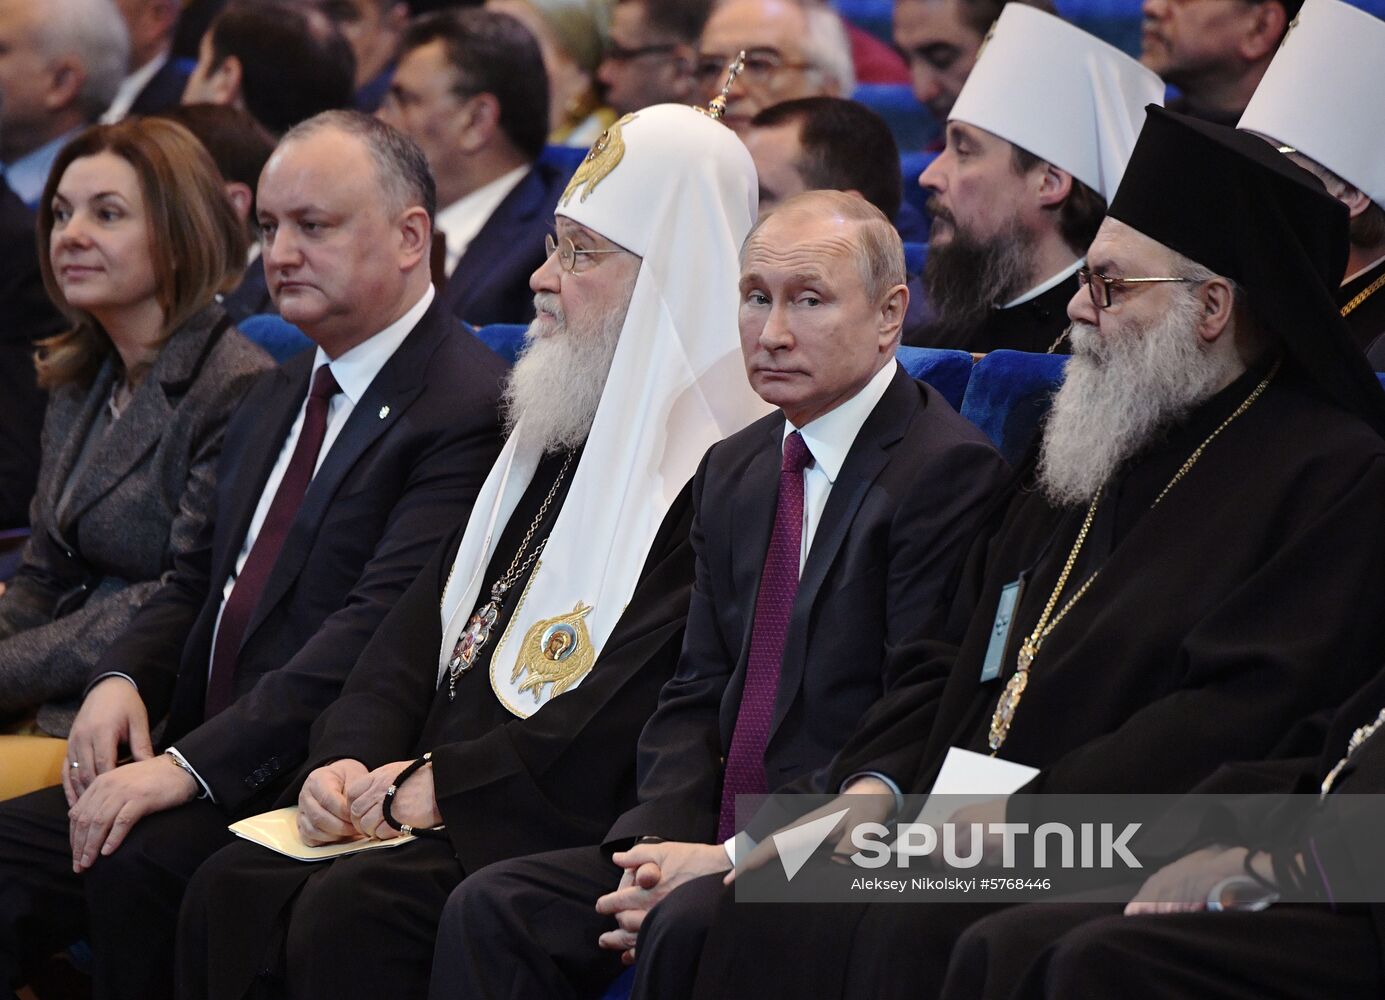 Vladimir Putin attends events marking 10th anniversary of Church Council and Patriarch enthronement